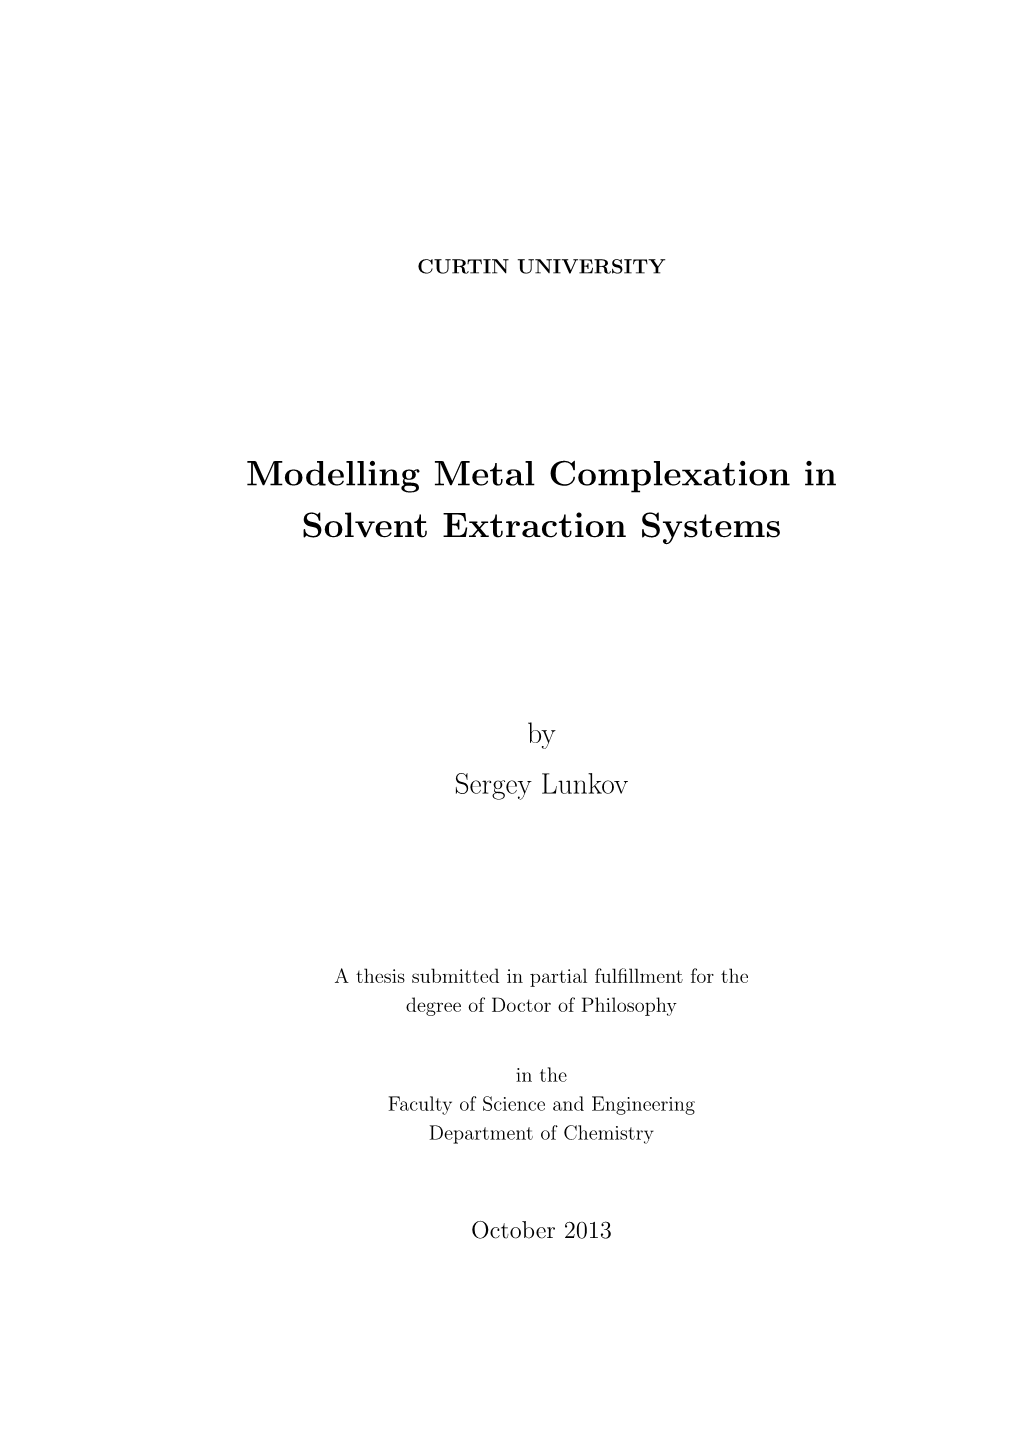 Modelling Metal Complexation in Solvent Extraction Systems